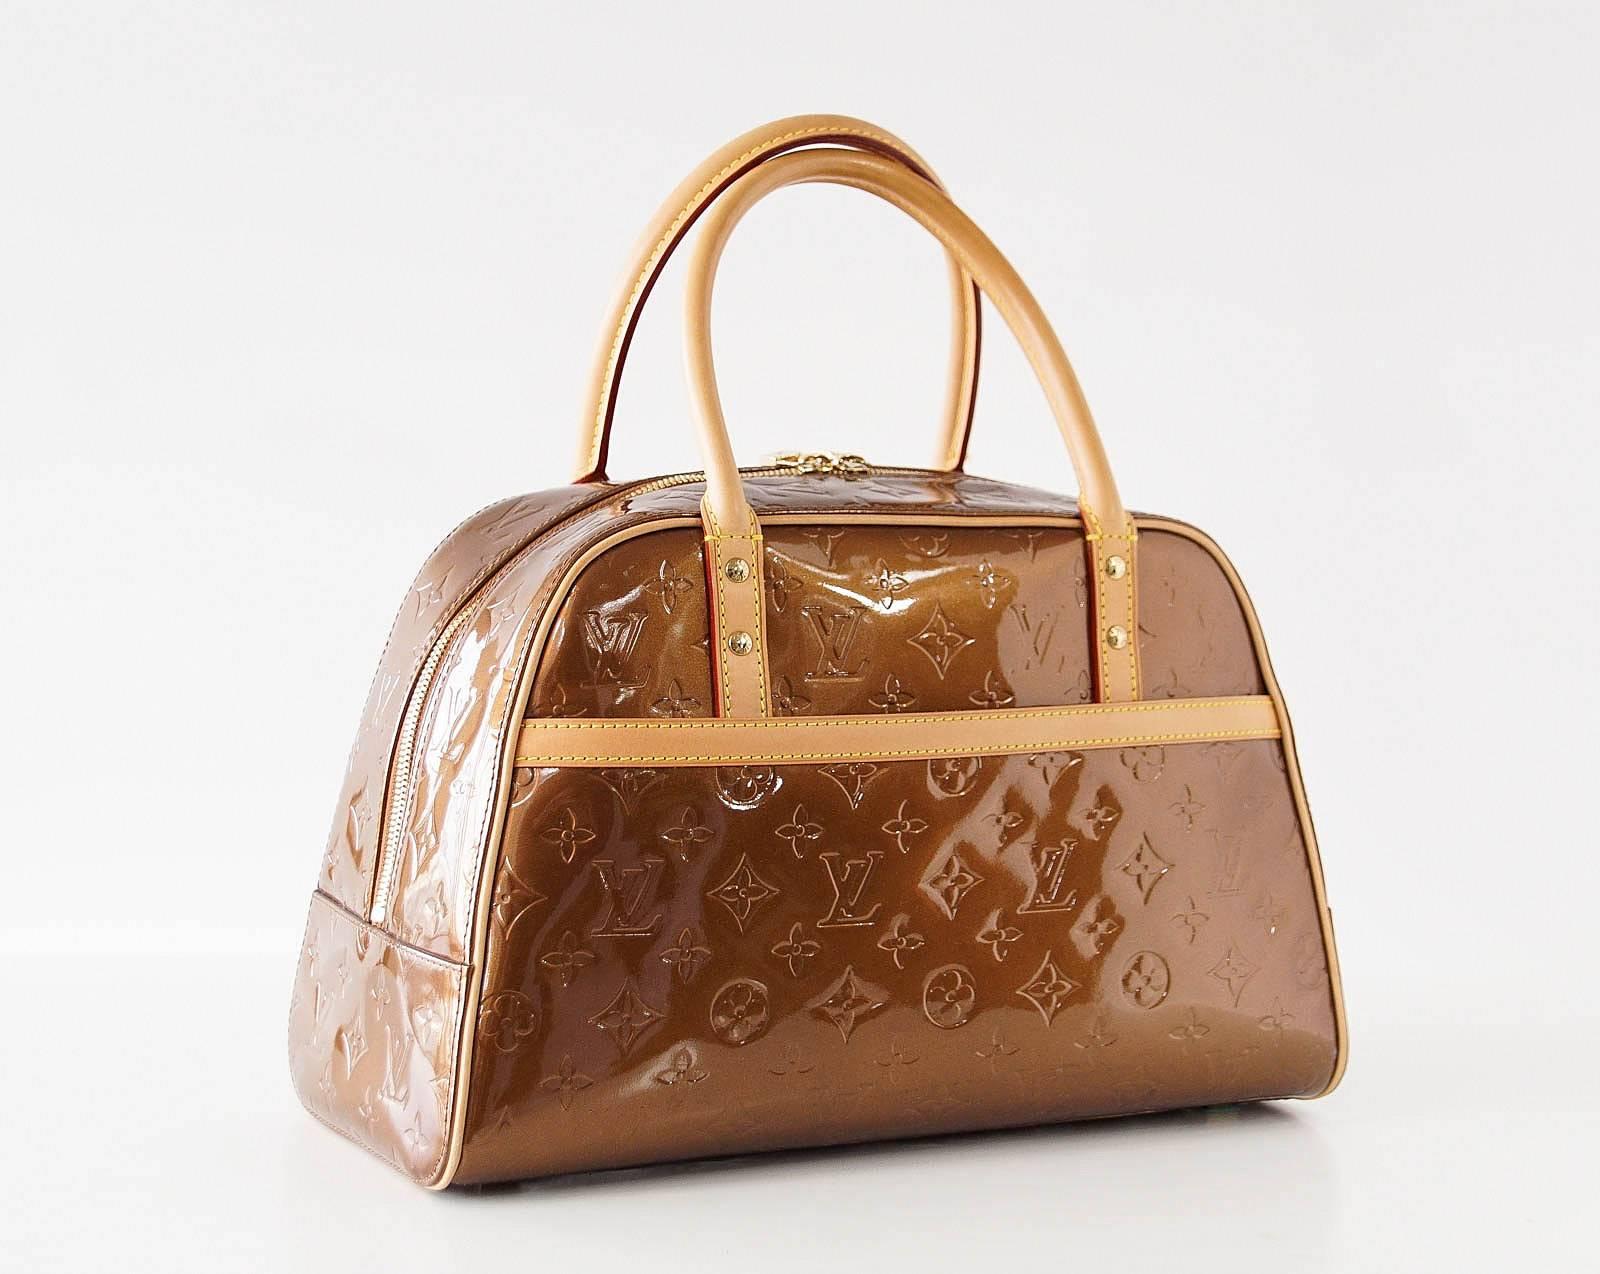 Guaranteed authentic LOUIS VUITTON bronze Tompkins Square Satchel Monogram vernis bag. 
Classic beauty.
Top zip with logo embossed pull.
Exterior slot pocket in front.
1 interior pocket with cutout for cell phone.
8 logo embossed grommets on base of